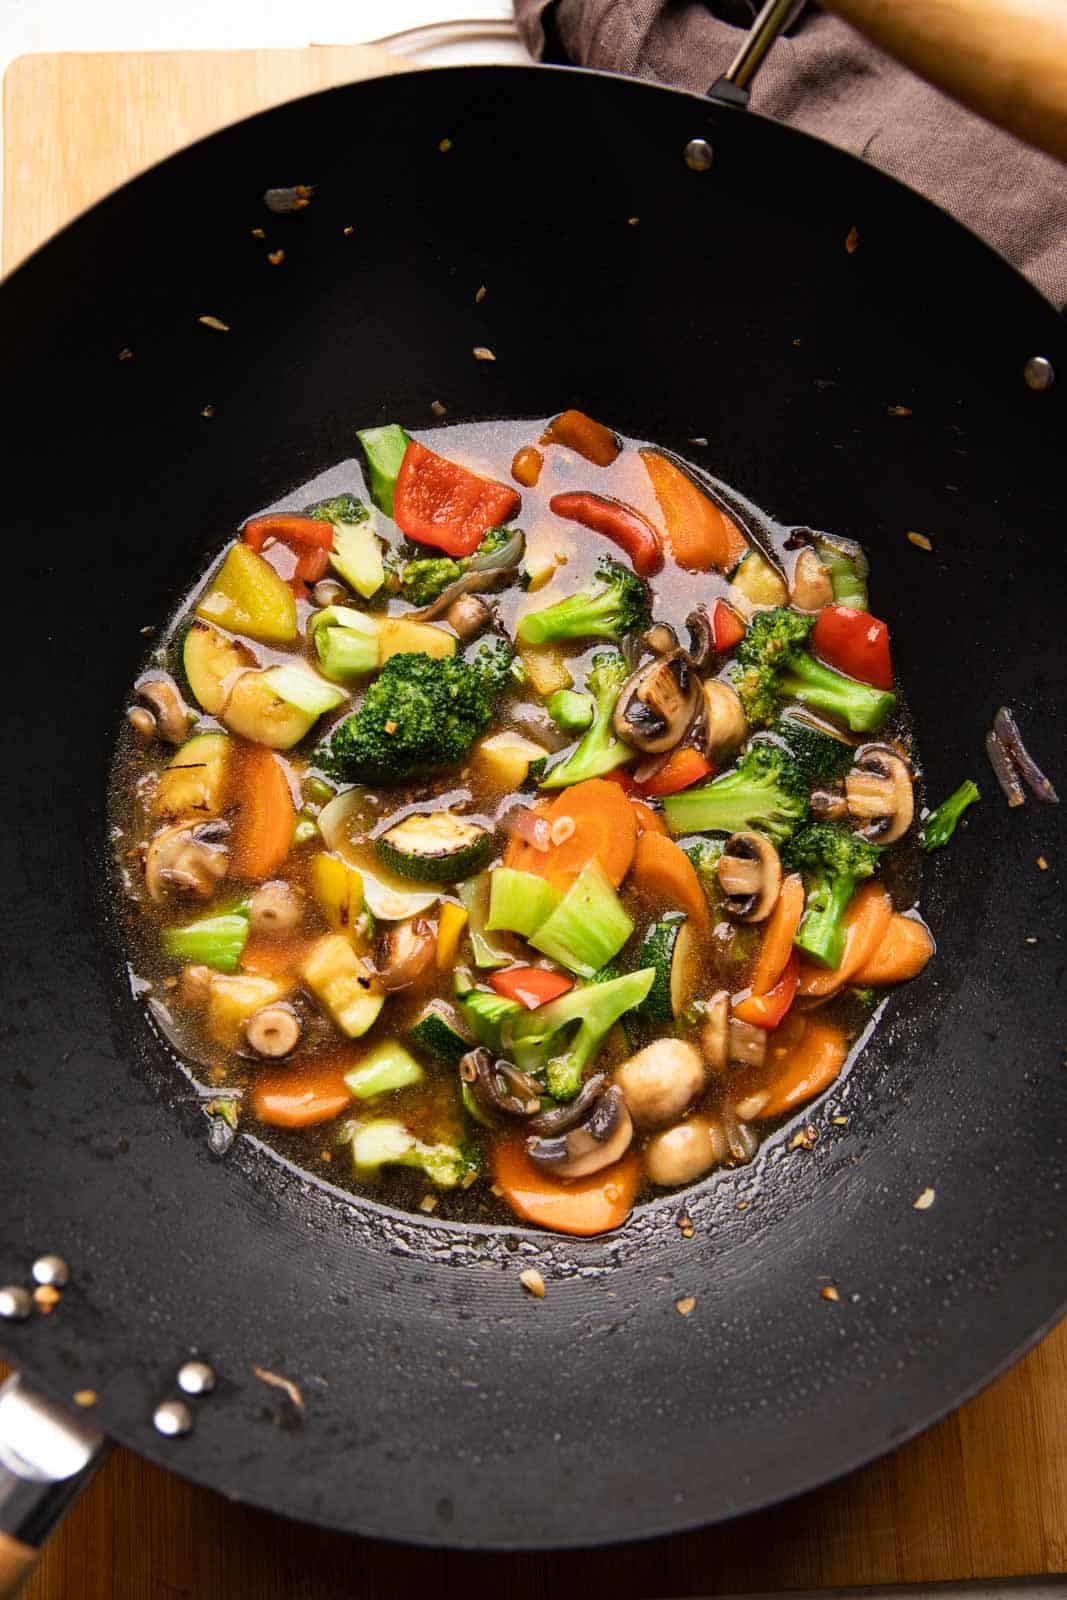 Picture of Asian Vegetable Stir Fry in a wok